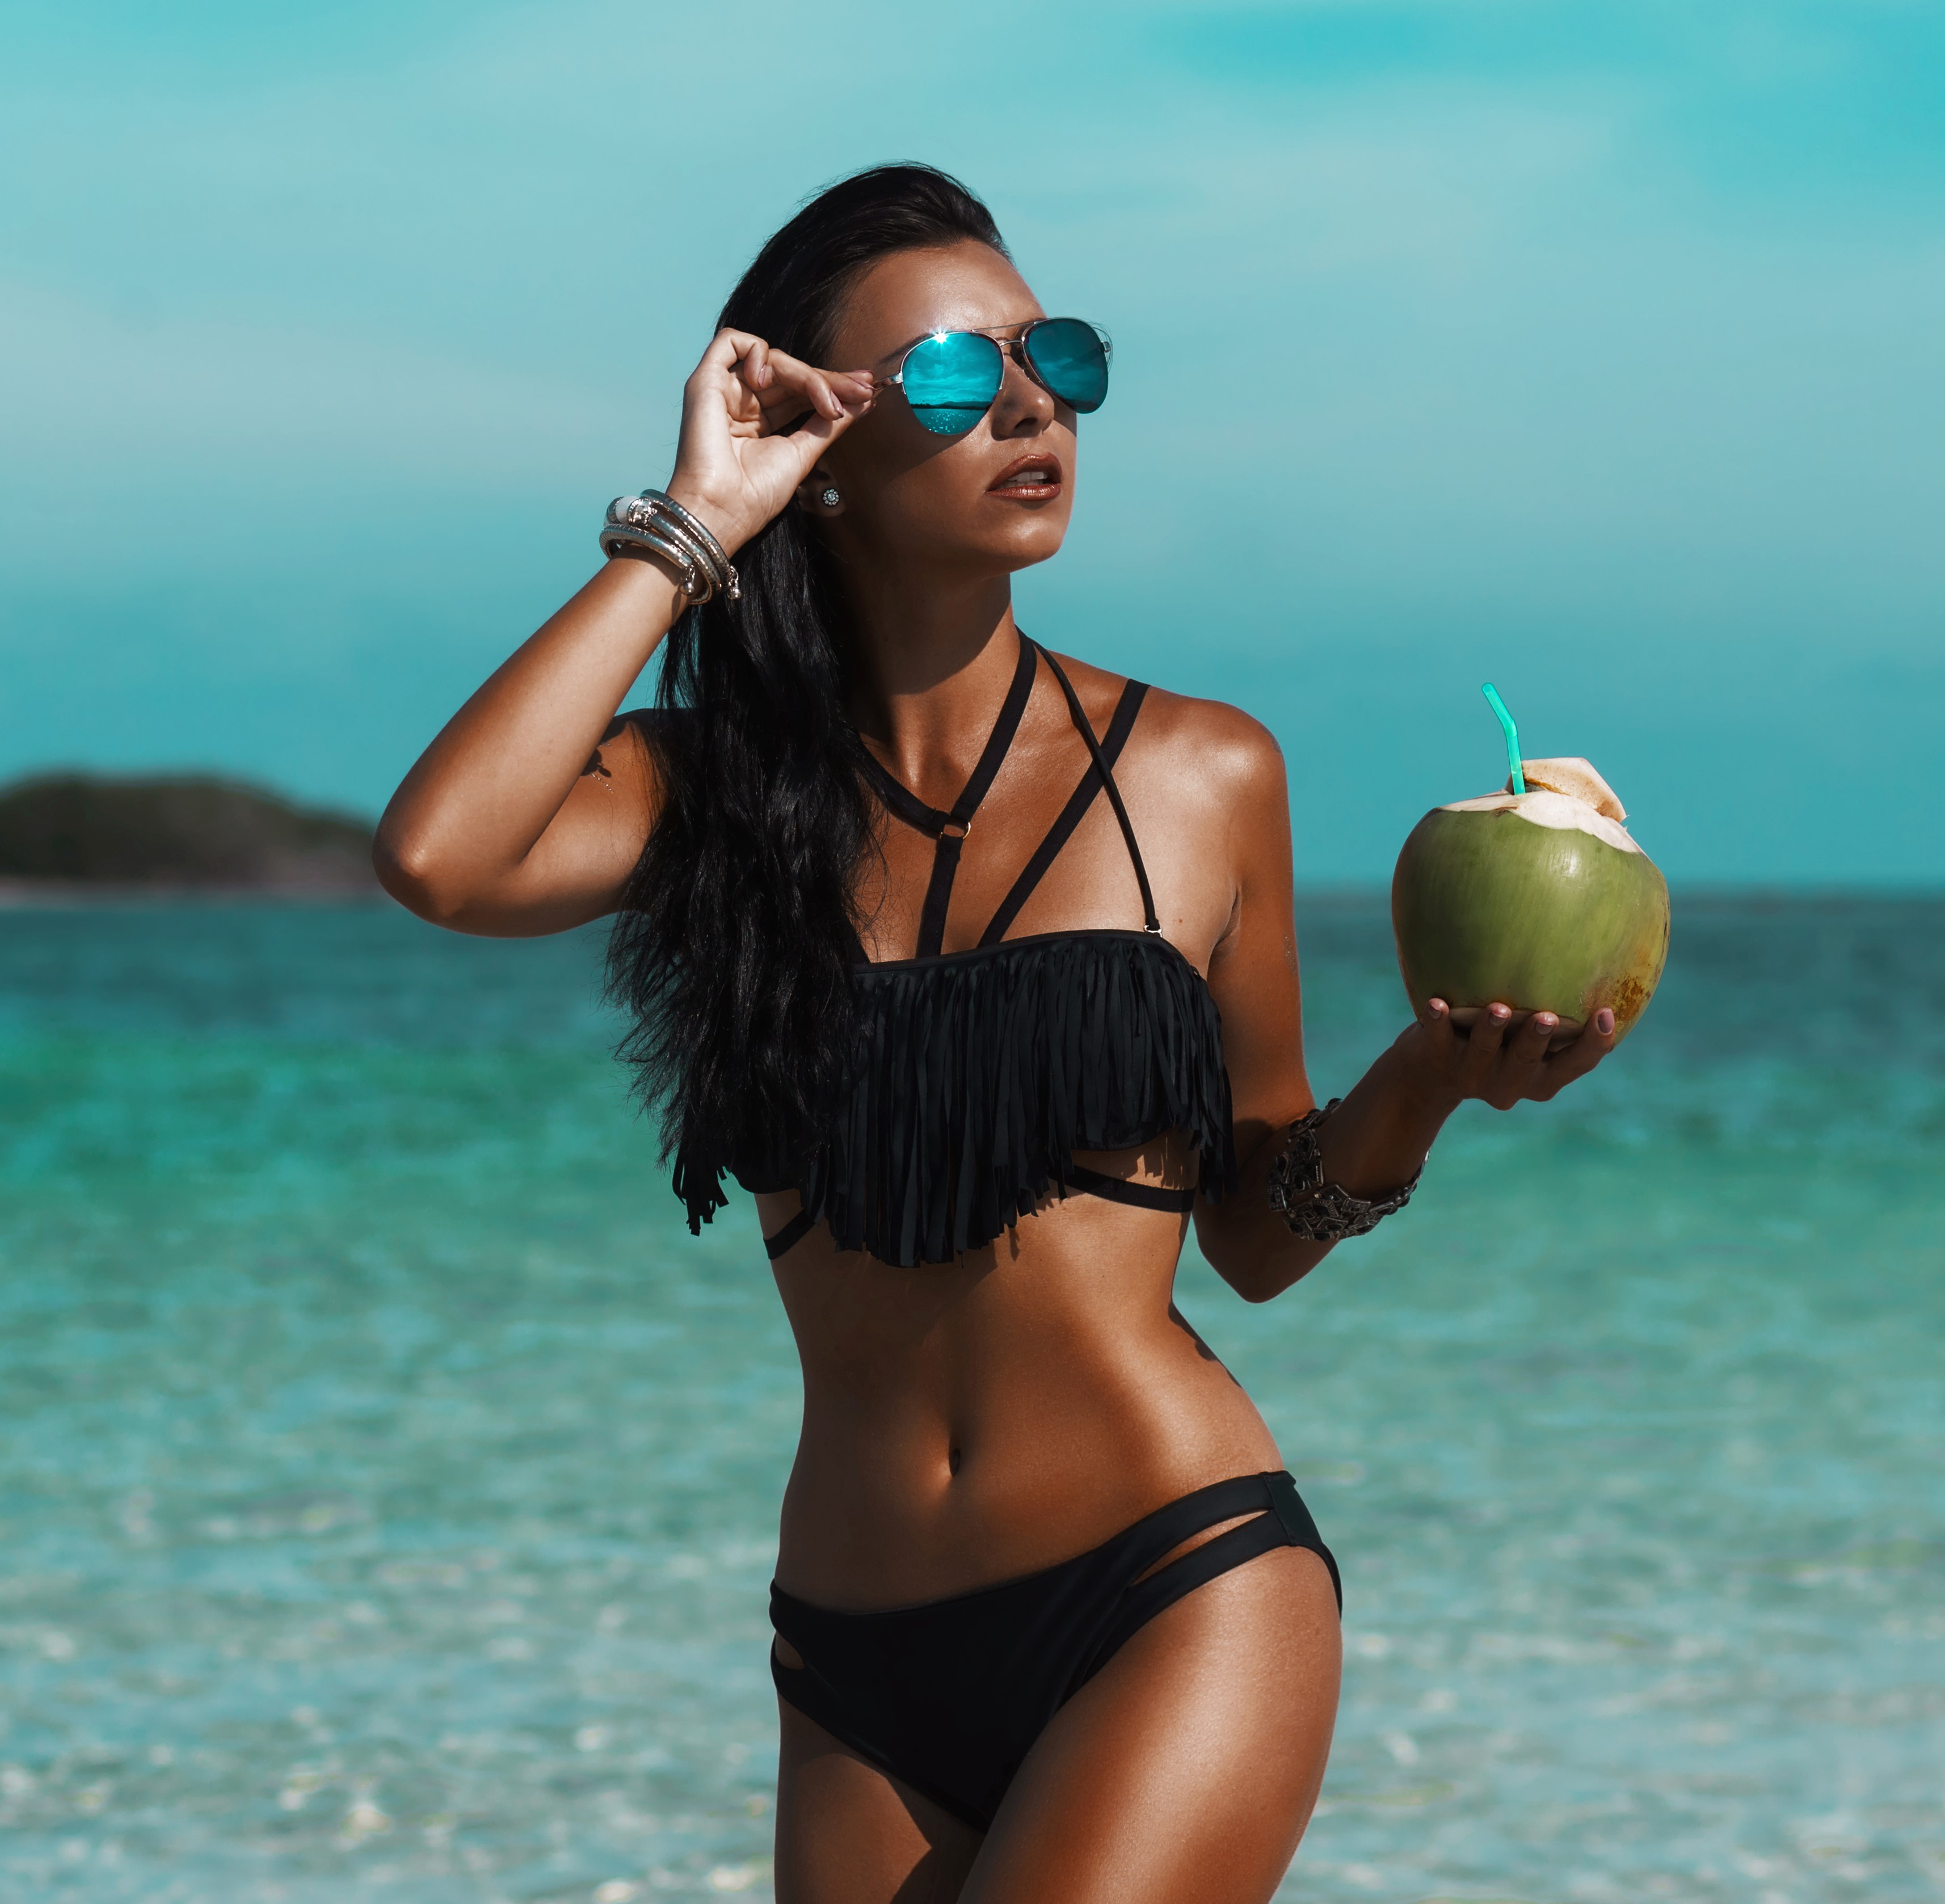 Beautiful sexy amazing young woman on the beach, excellent time, tanned radiant skin, long hair, black bikini, mirror sunglasses, fashion, glamor, vacation on a tropical island,  low key photos